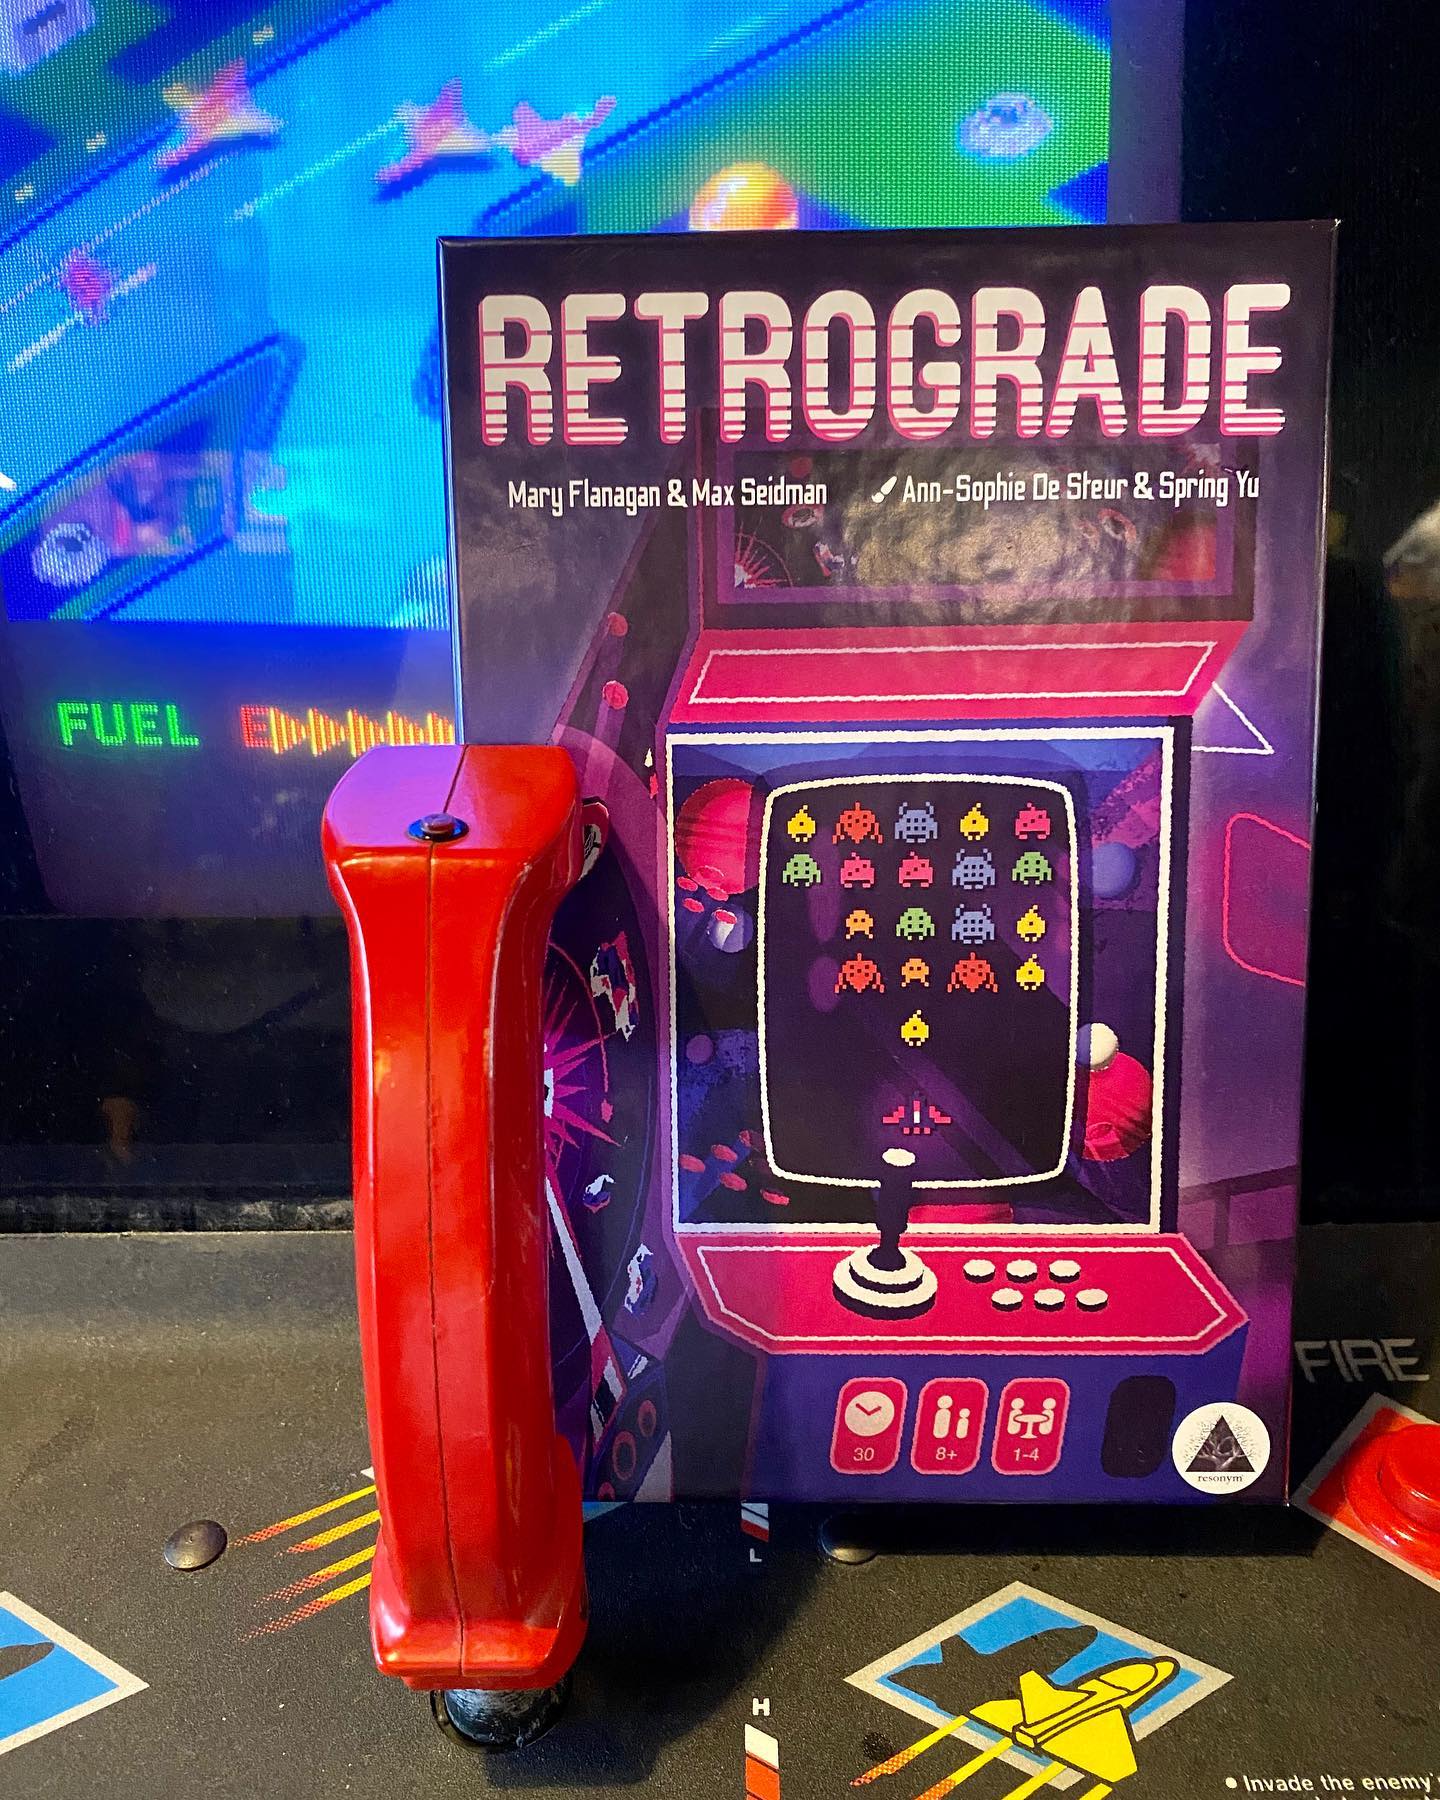 It finally landed! We’re thrilled to announce our next game, Retrograde, will be launching its crowdfunding campaign on February 15th. Retrograde is a real time roll and write with a retro arcade theme, that tasks you with blasting baddies and pulling power ups to get the high score. We’re so totally stoked for you to see it! 

#boardgames #indieboardgames #boardgamephotography #boardgaming #gamenight #boardgamesofinstagram #resonym #boardgamegeek #bgg #dice #arcadegames #retro #retrogaming #retroaesthetic #arcade